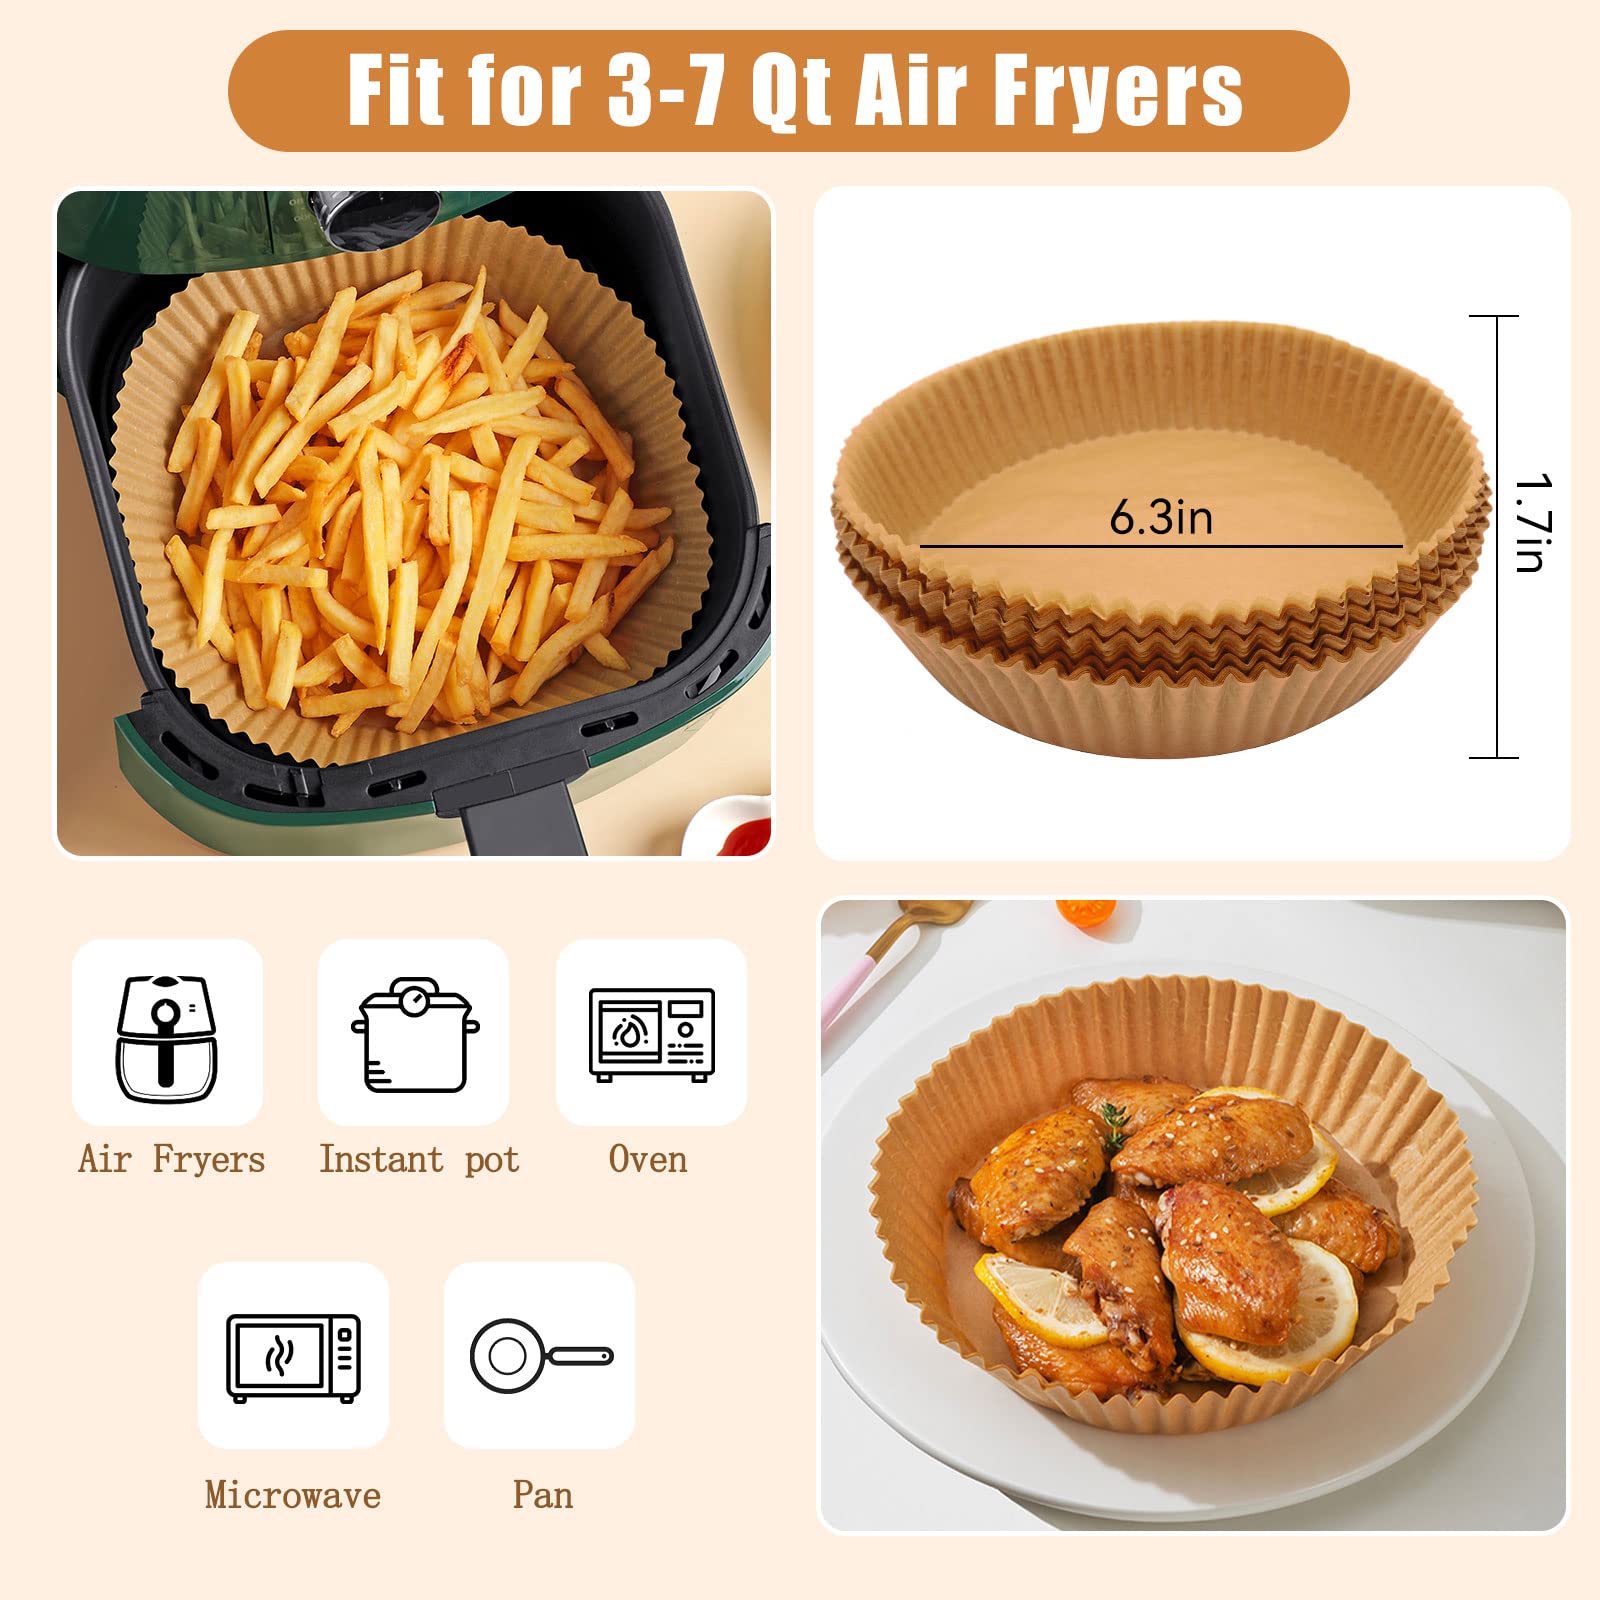 Air Fryer Disposable Paper 100 Pcs 6.3 inch Air Fryer Round Non-Stick Prime Oil-proof Parchment Cooking Paper for Fryers Basket Frying Pan Microwave Oven